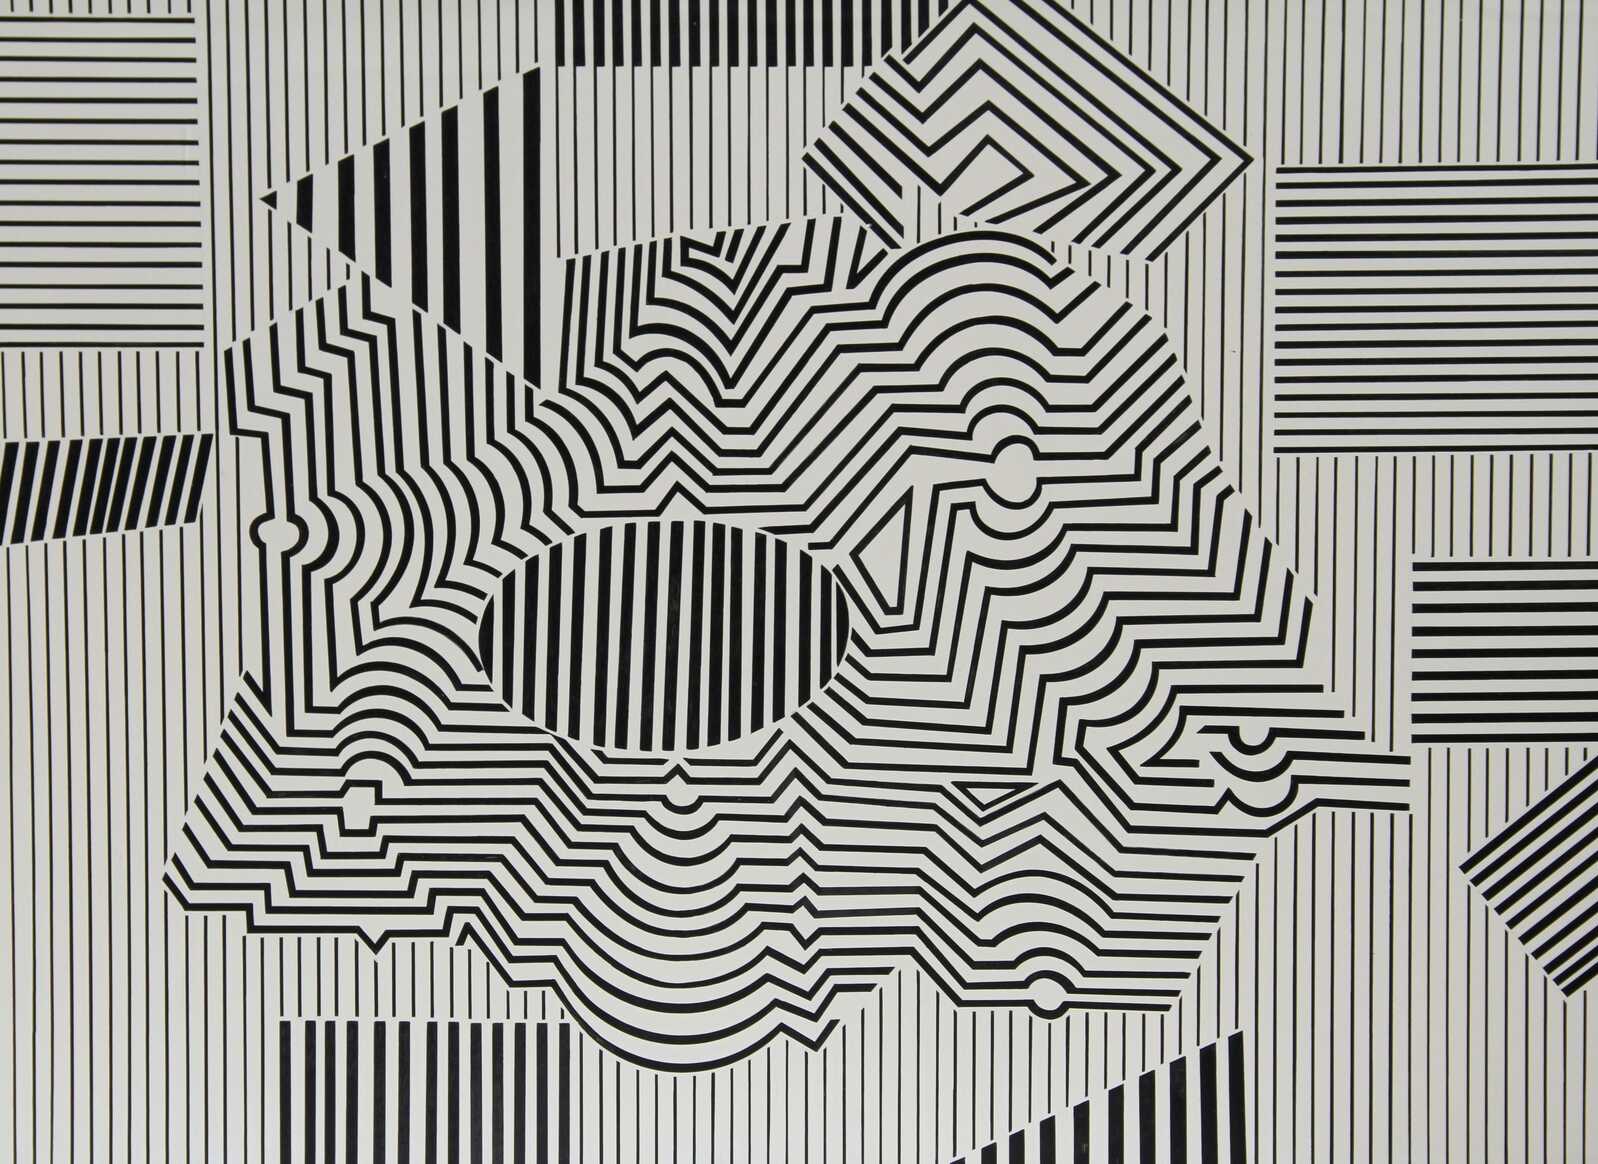 Victor Vasarely | Operenccia (1954-1986) | Available for Sale | Artsy